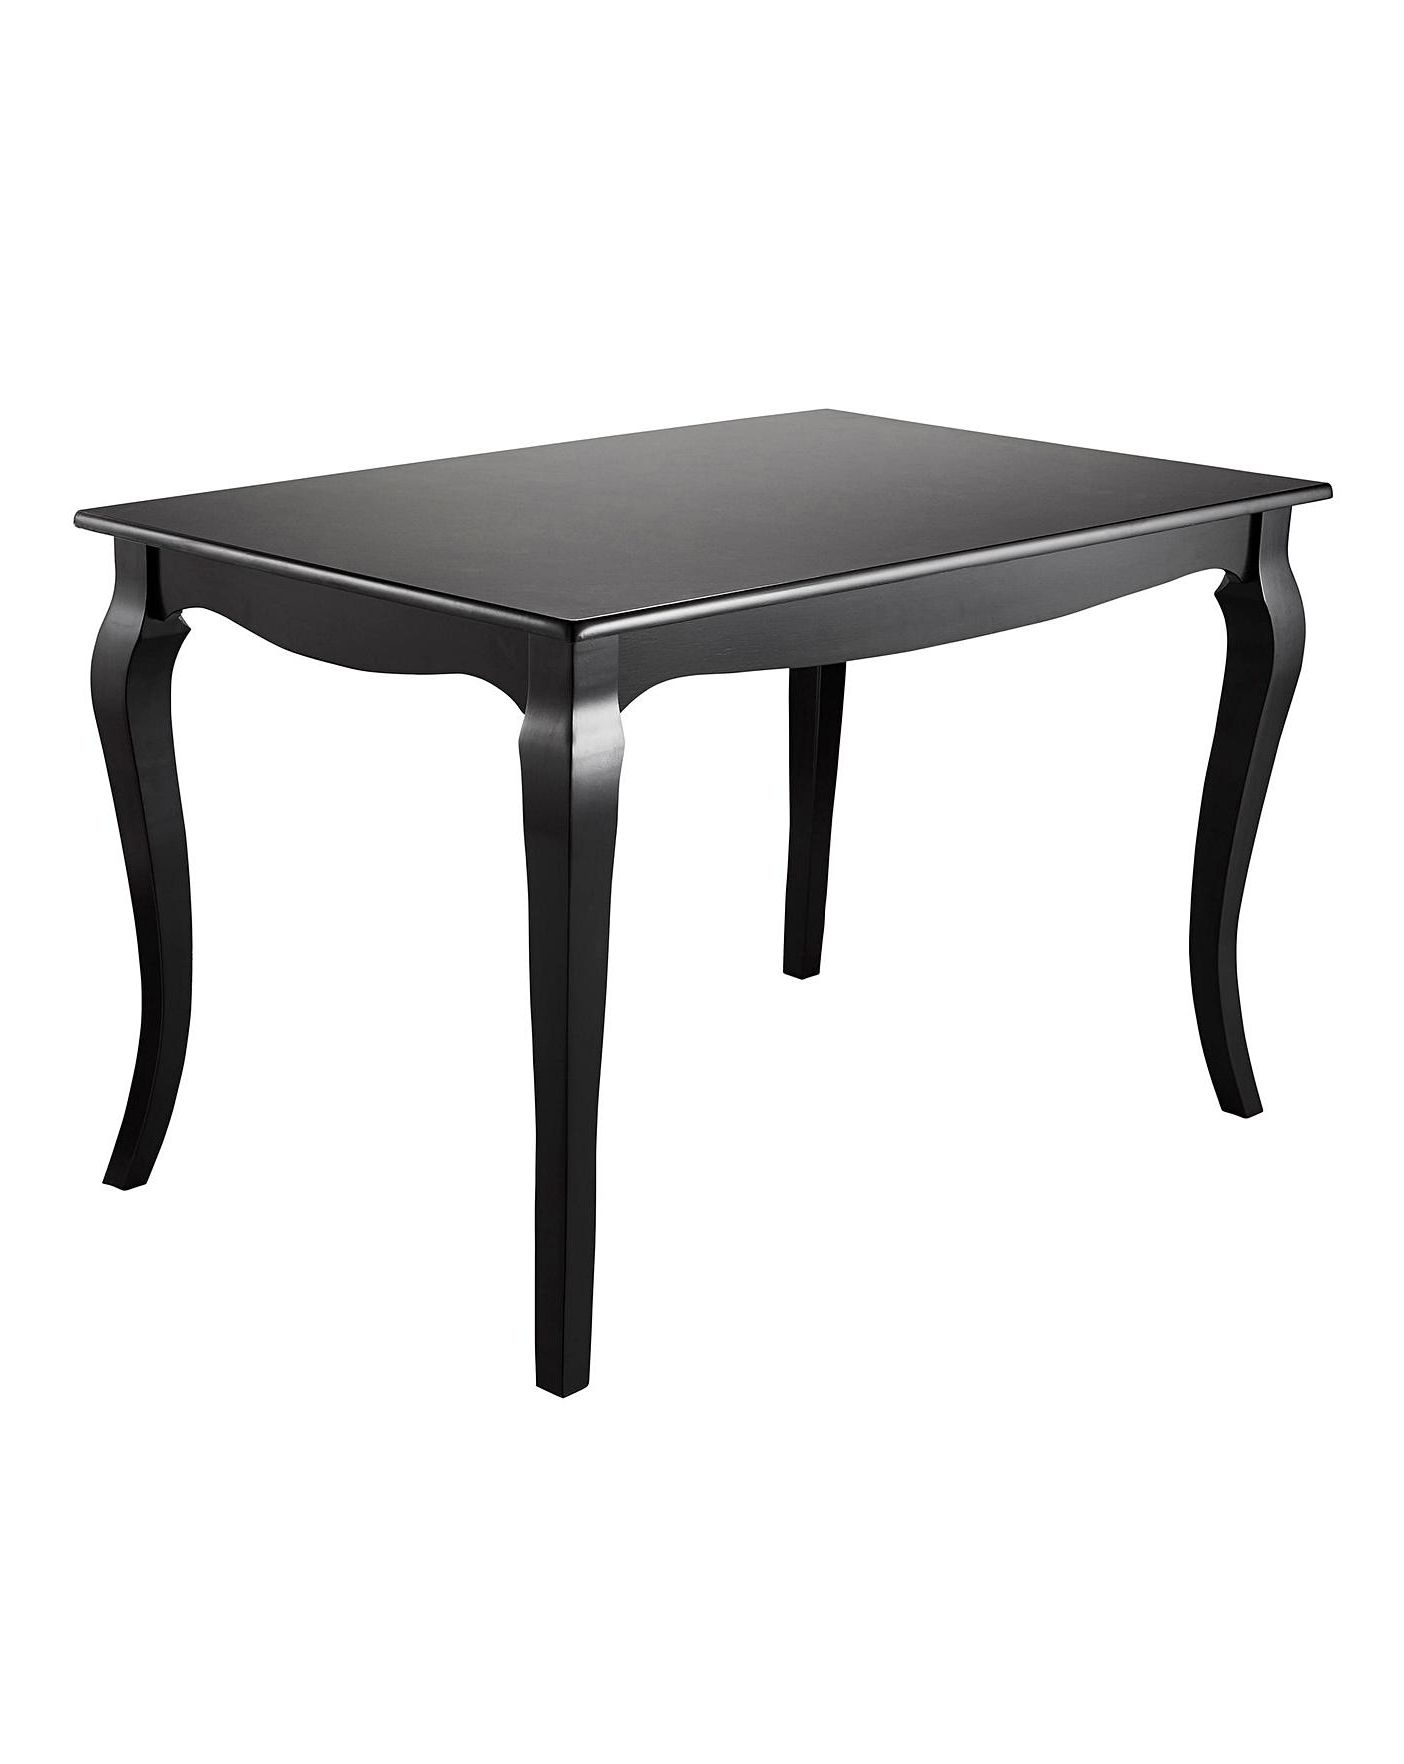 Rectangular Dining Tables Throughout Widely Used Elise Rectangular Dining Table (View 25 of 25)